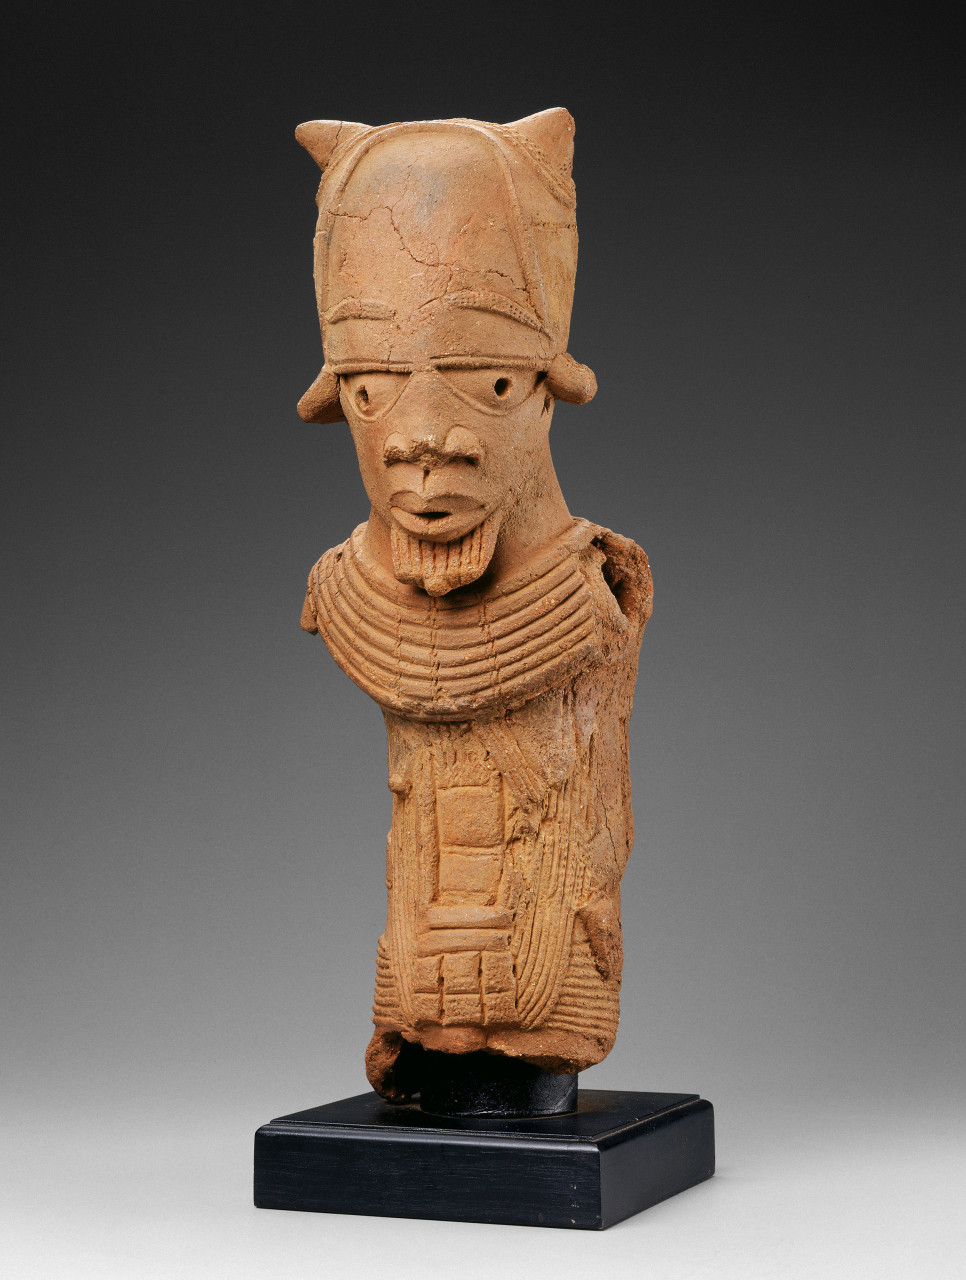 A ceramic terracotta male figure created by the African Nok peoples that dates back to between 500 B.C. – A.D. 200 in Nigeria. Lent by the estate of William E. Teel. (Courtesy Museum of Fine Arts, Boston)